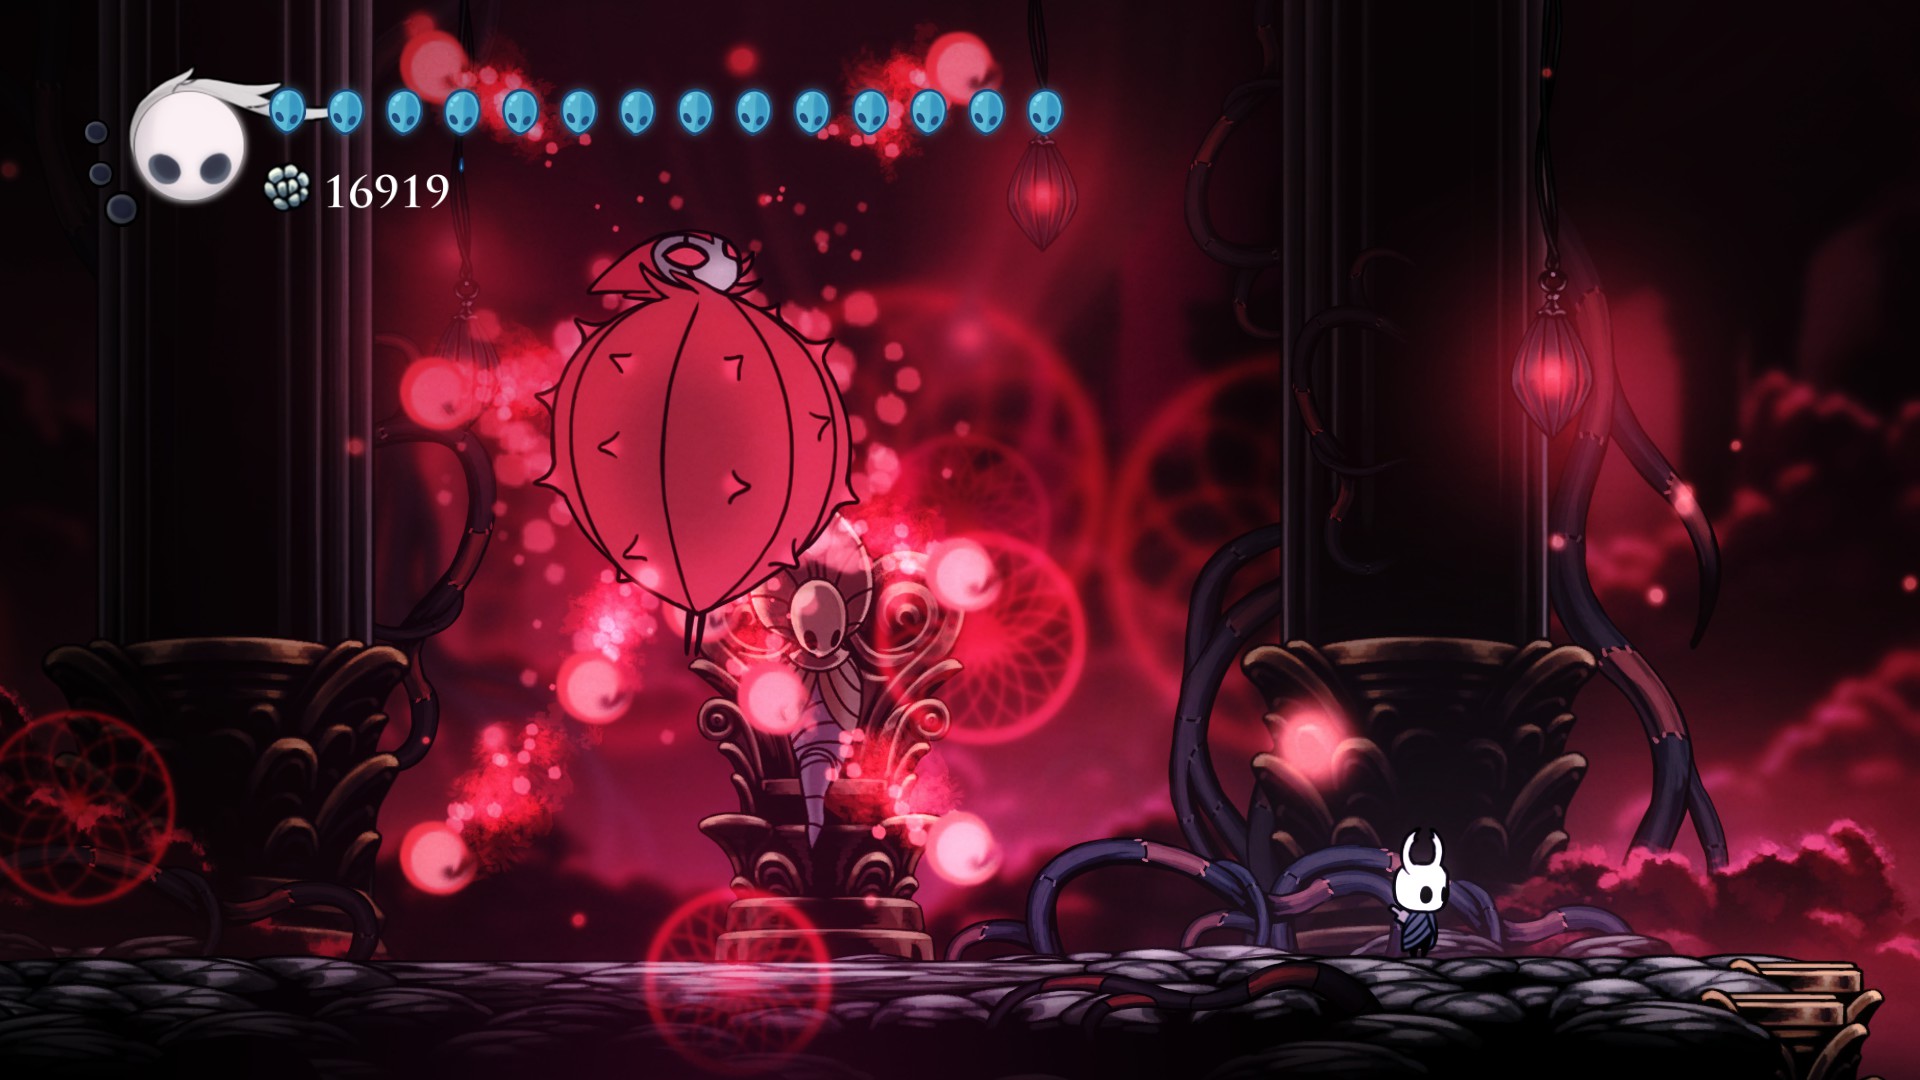 Hollow Knight - How to beat NKG